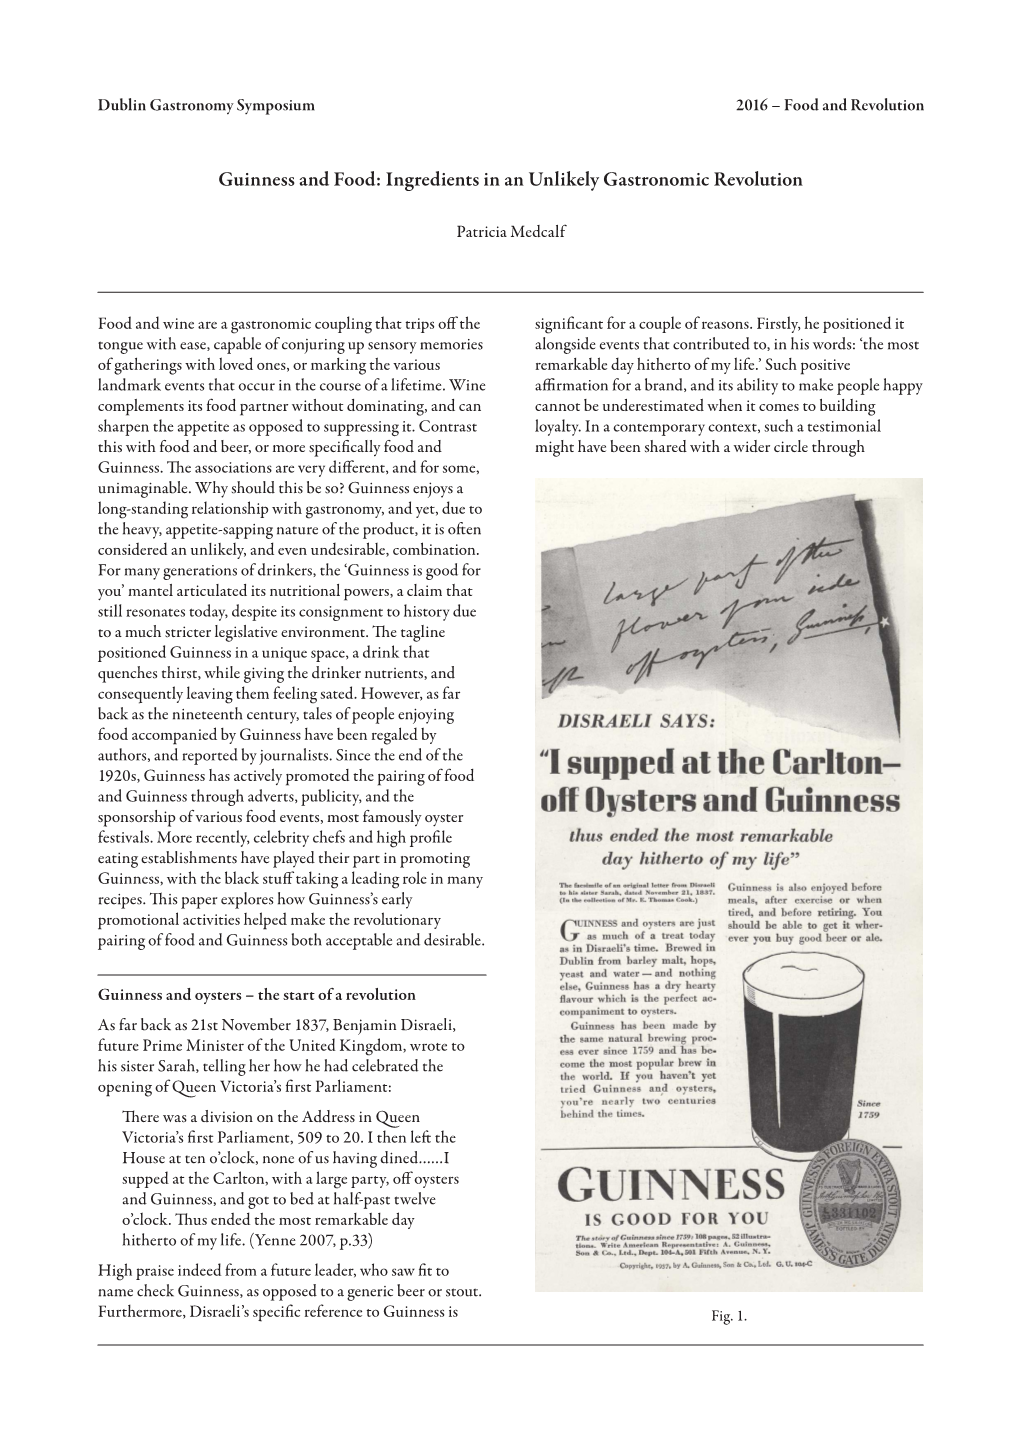 Guinness and Food: Ingredients in an Unlikely Gastronomic Revolution